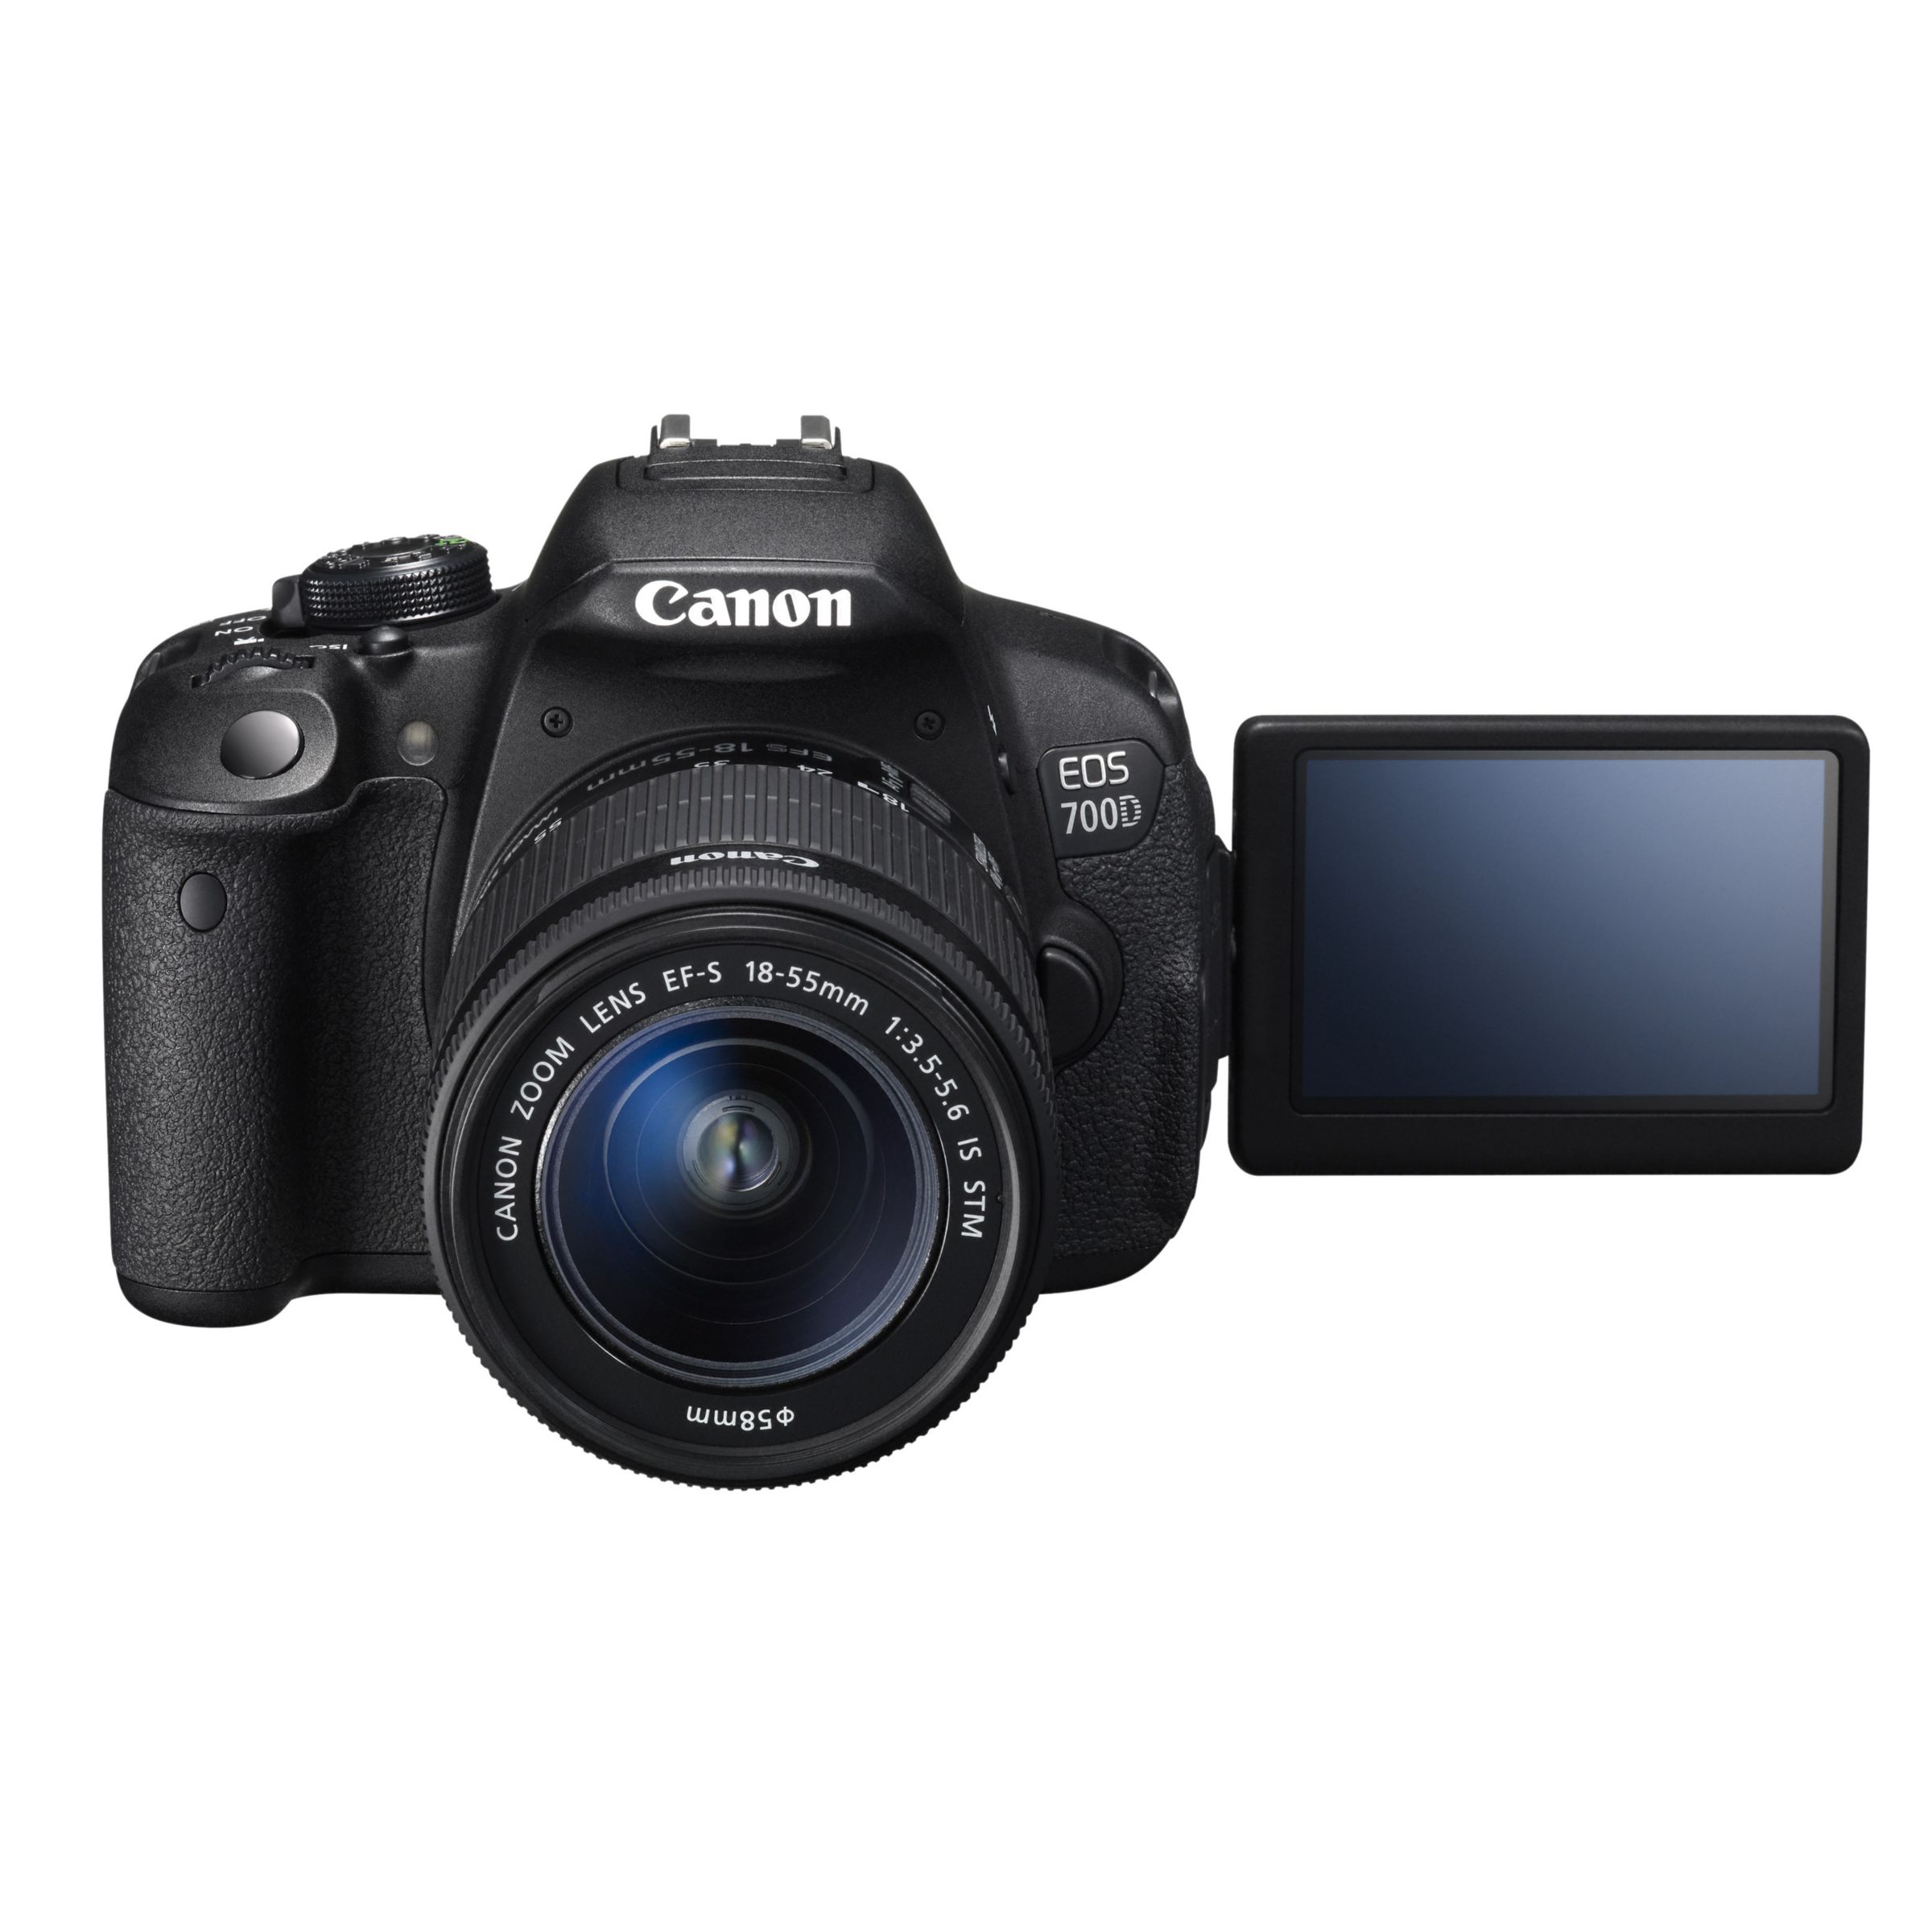 Canon Eos 700d Digital Slr Camera With 18 55mm Stm Lens Hd 1080p